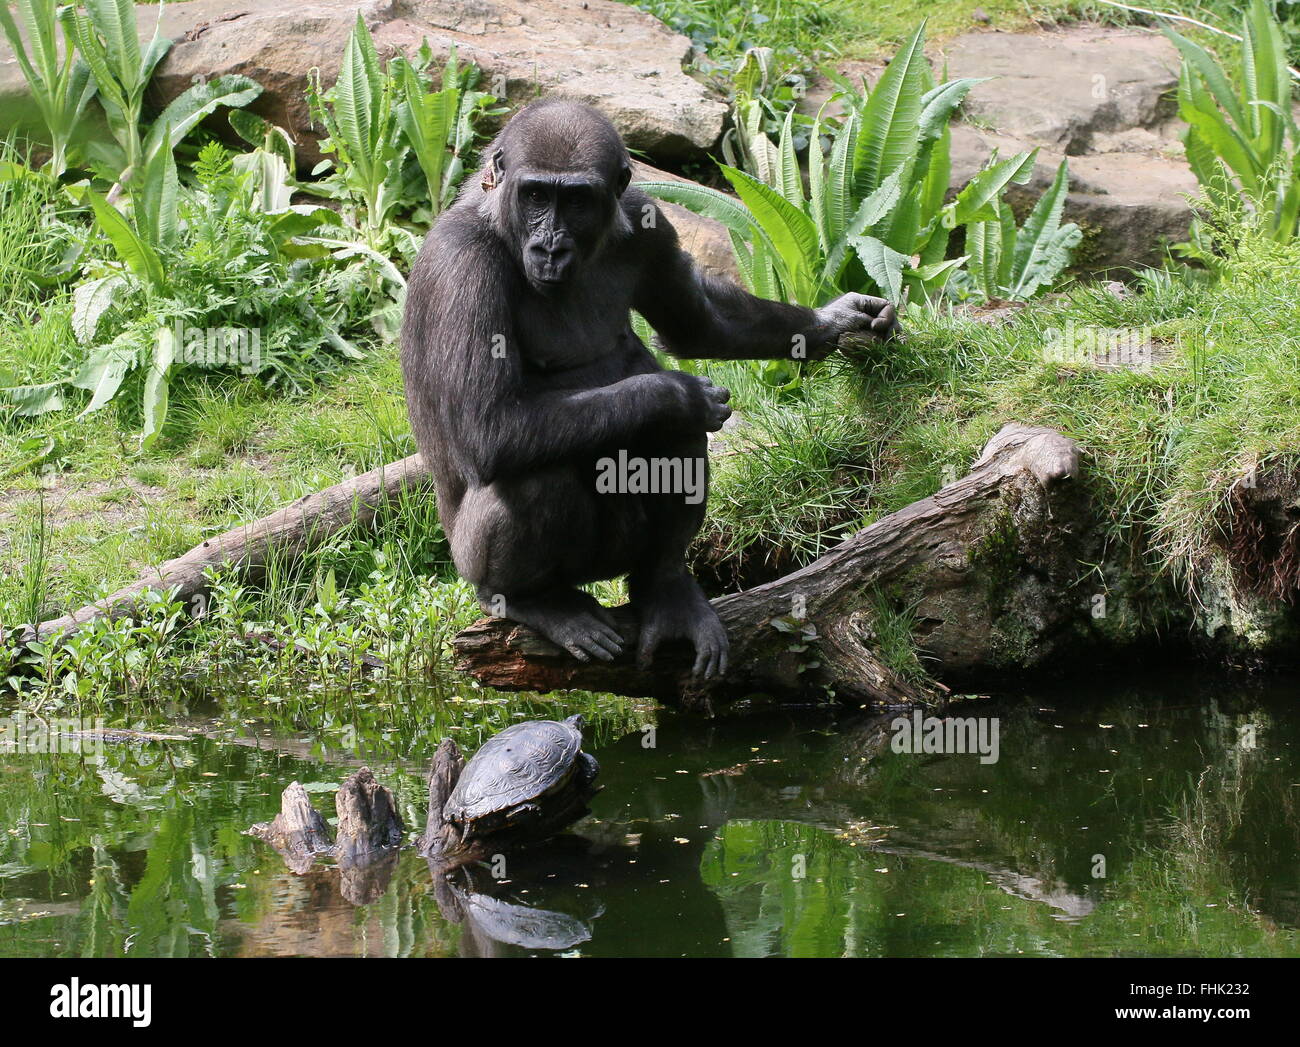 Western lowland gorilla at the water's edge, engrossed in observing a turtle Stock Photo